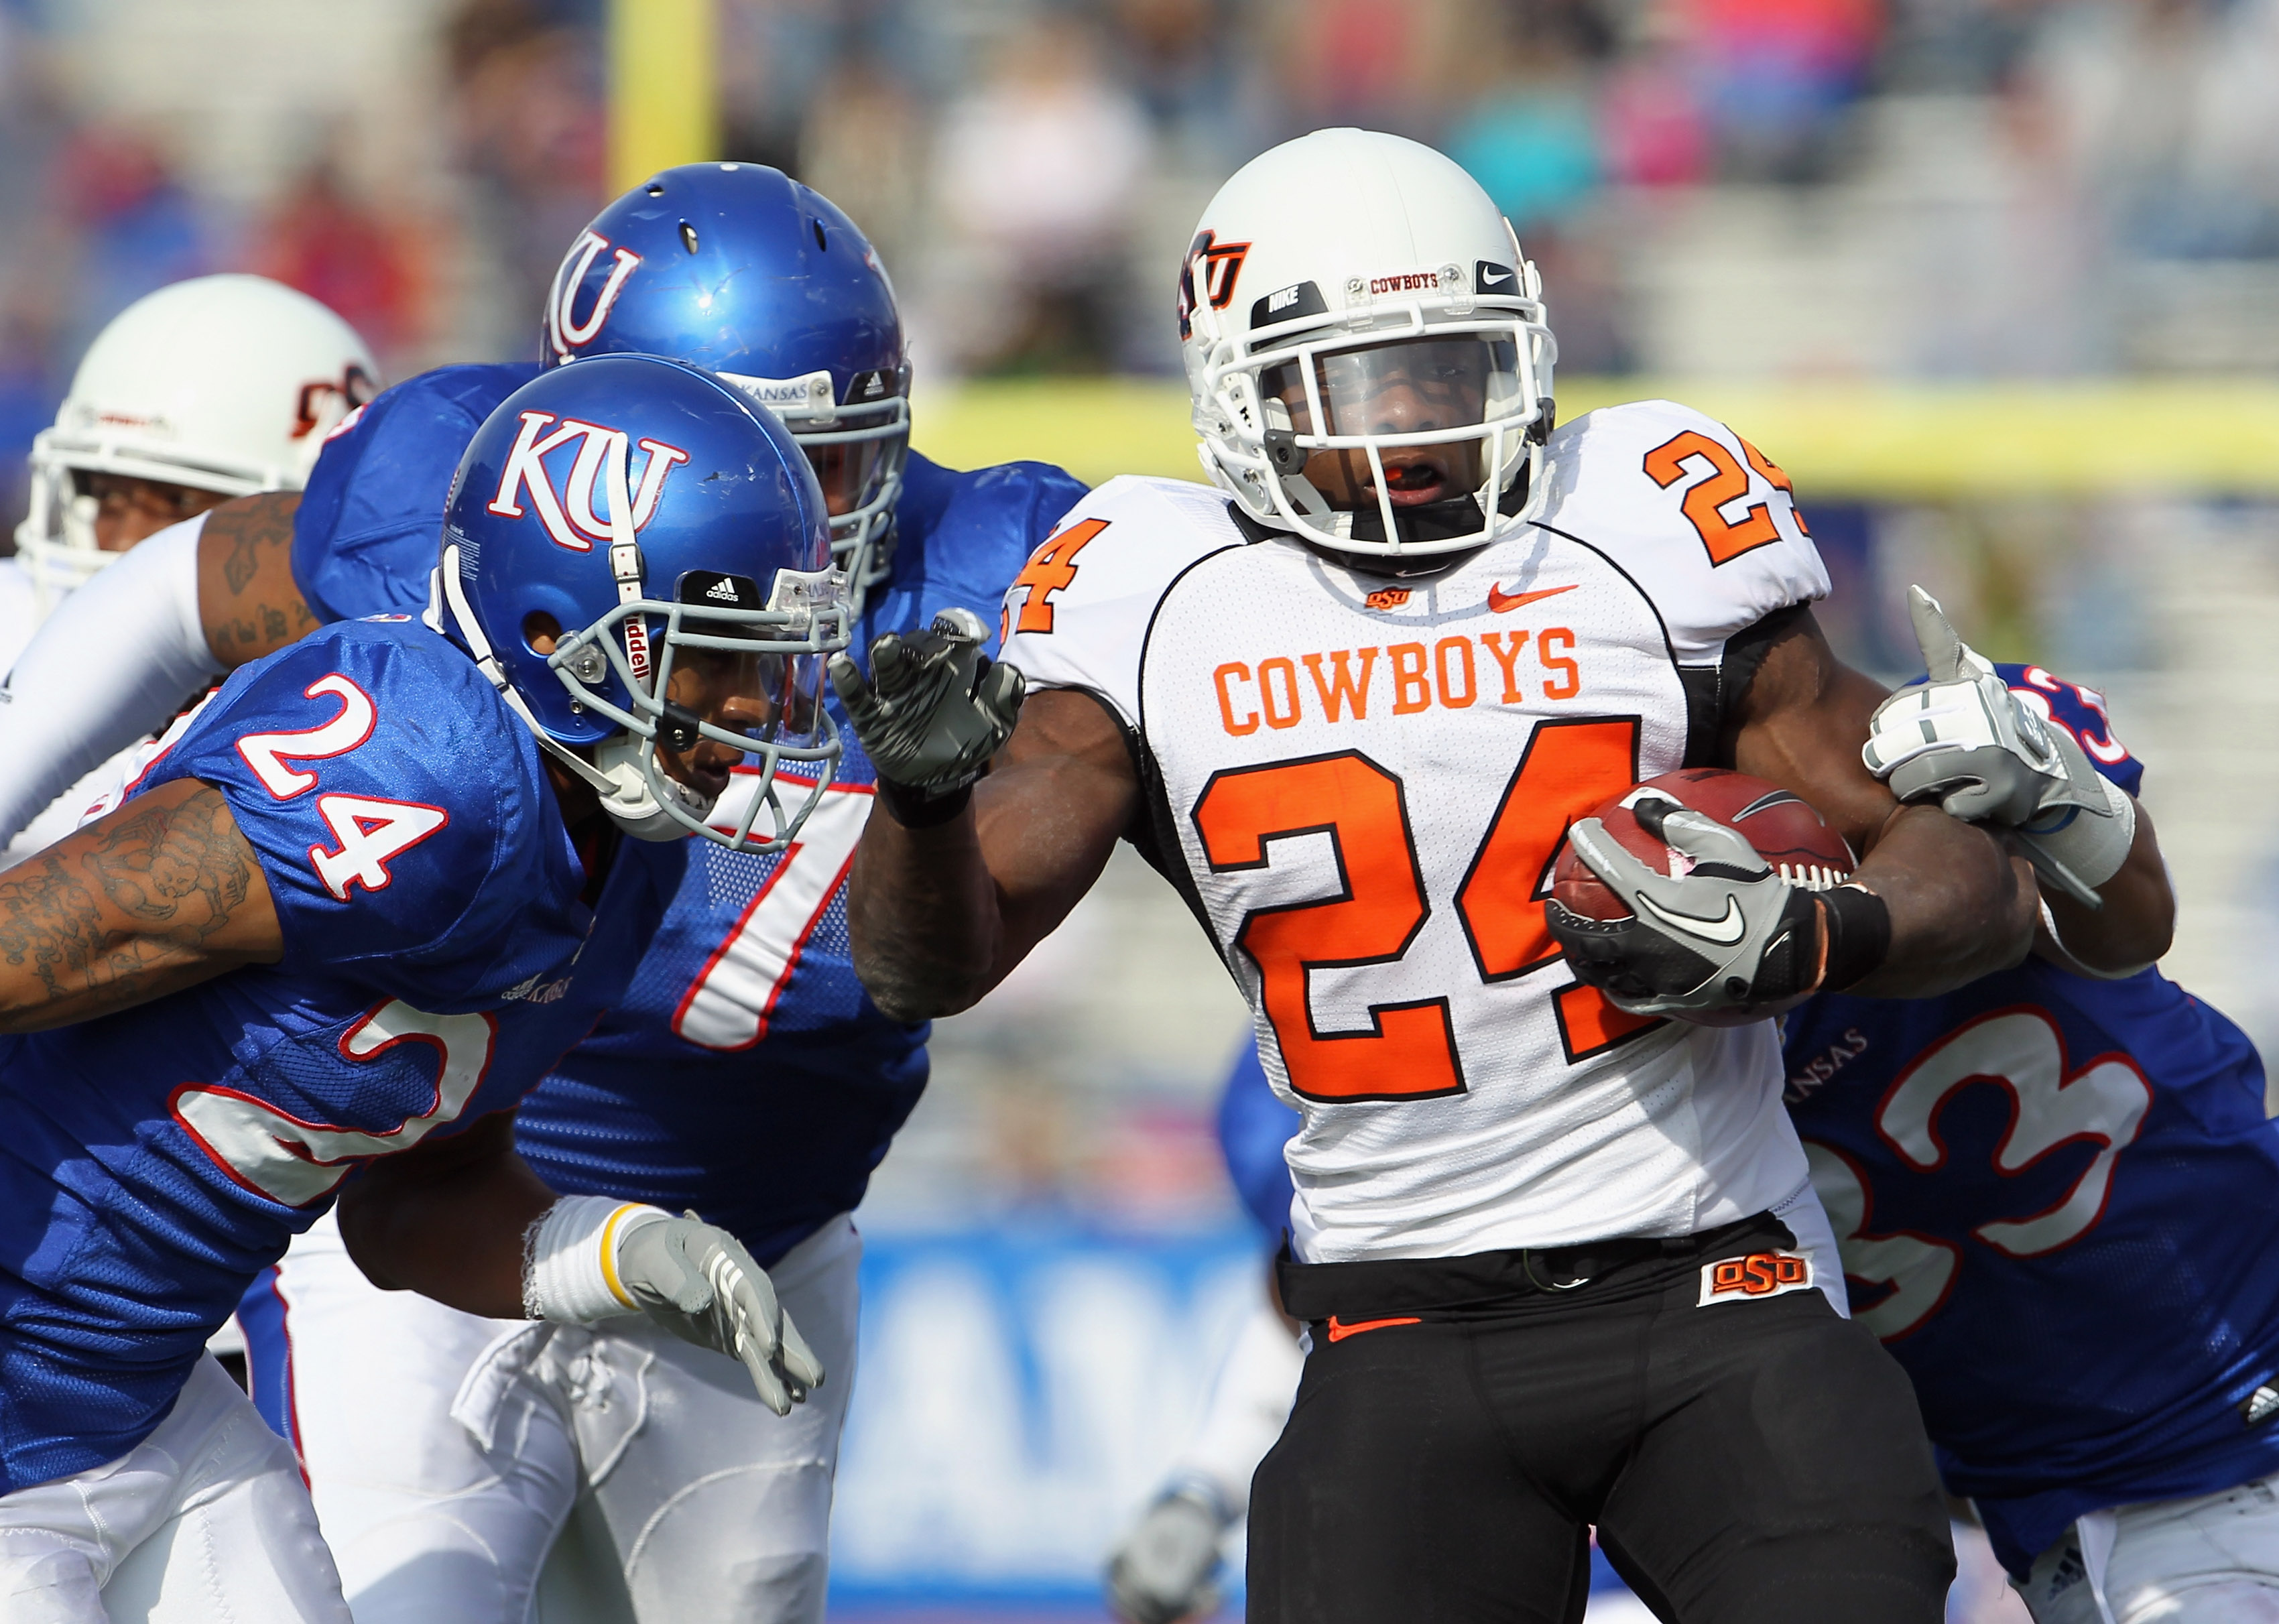 LAWRENCE, KS - NOVEMBER 20:  Running back Kendall Hunter #24 of the Oklahoma State Cowboys carries the ball during the game against the Kansas Jayhawks on November 20, 2010 at Memorial Stadium in Lawrence, Kansas.  (Photo by Jamie Squire/Getty Images)